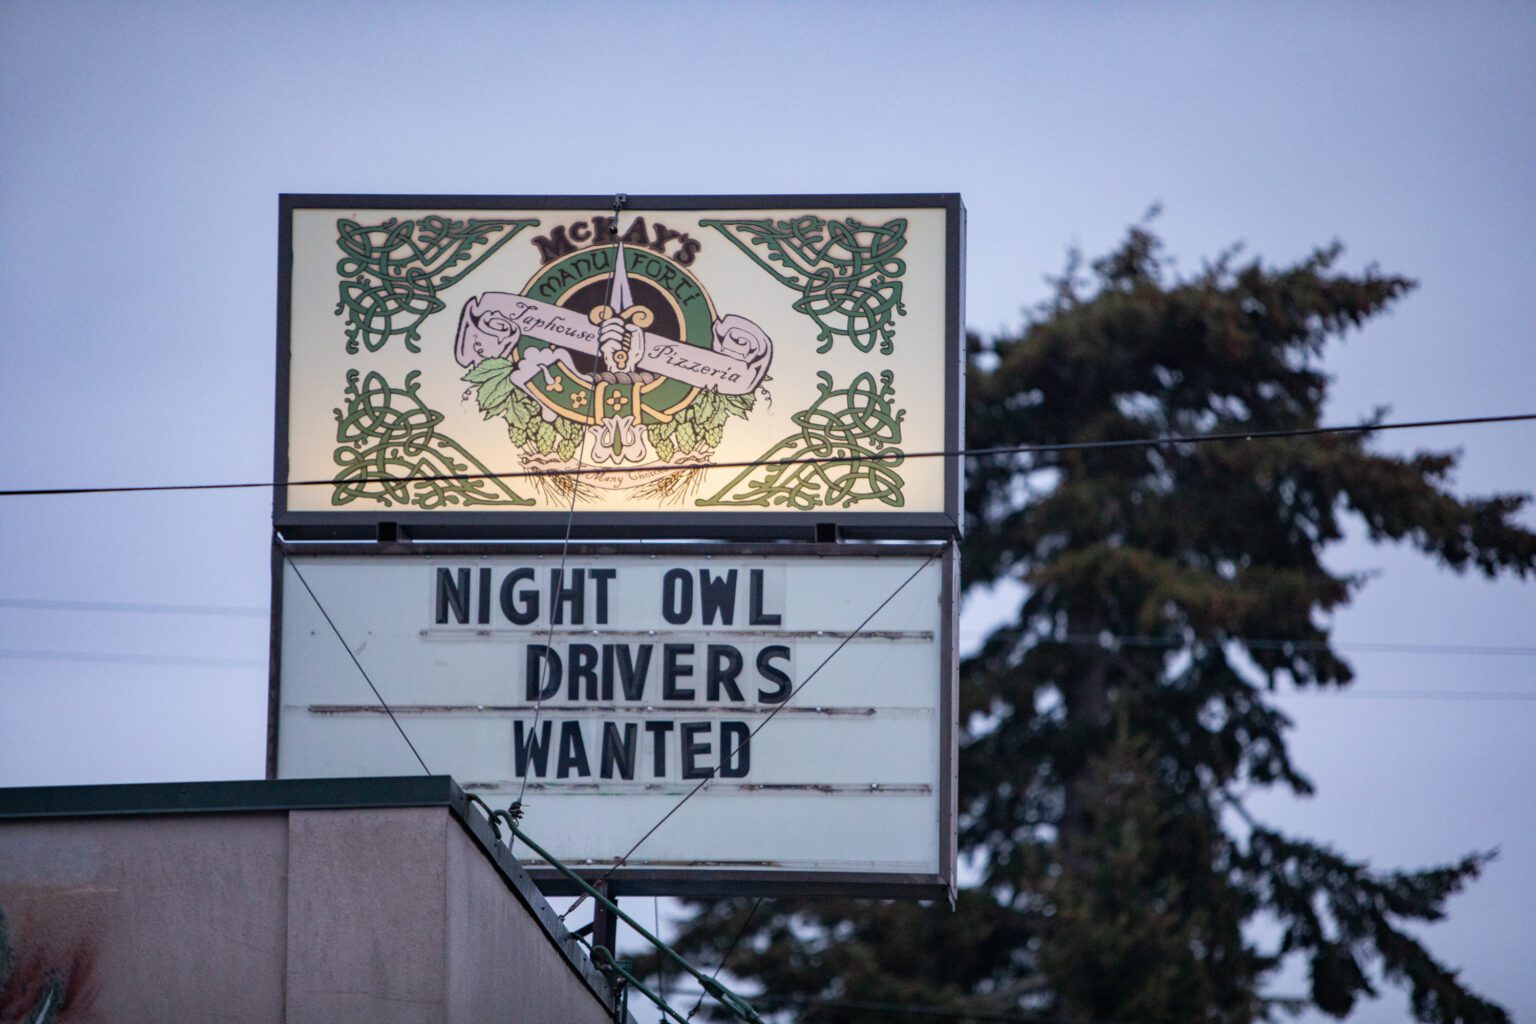 McKay's Taphouse and Pizzeria advertises for late-night delivery drivers. When asked about their hopes and expectations for 2023